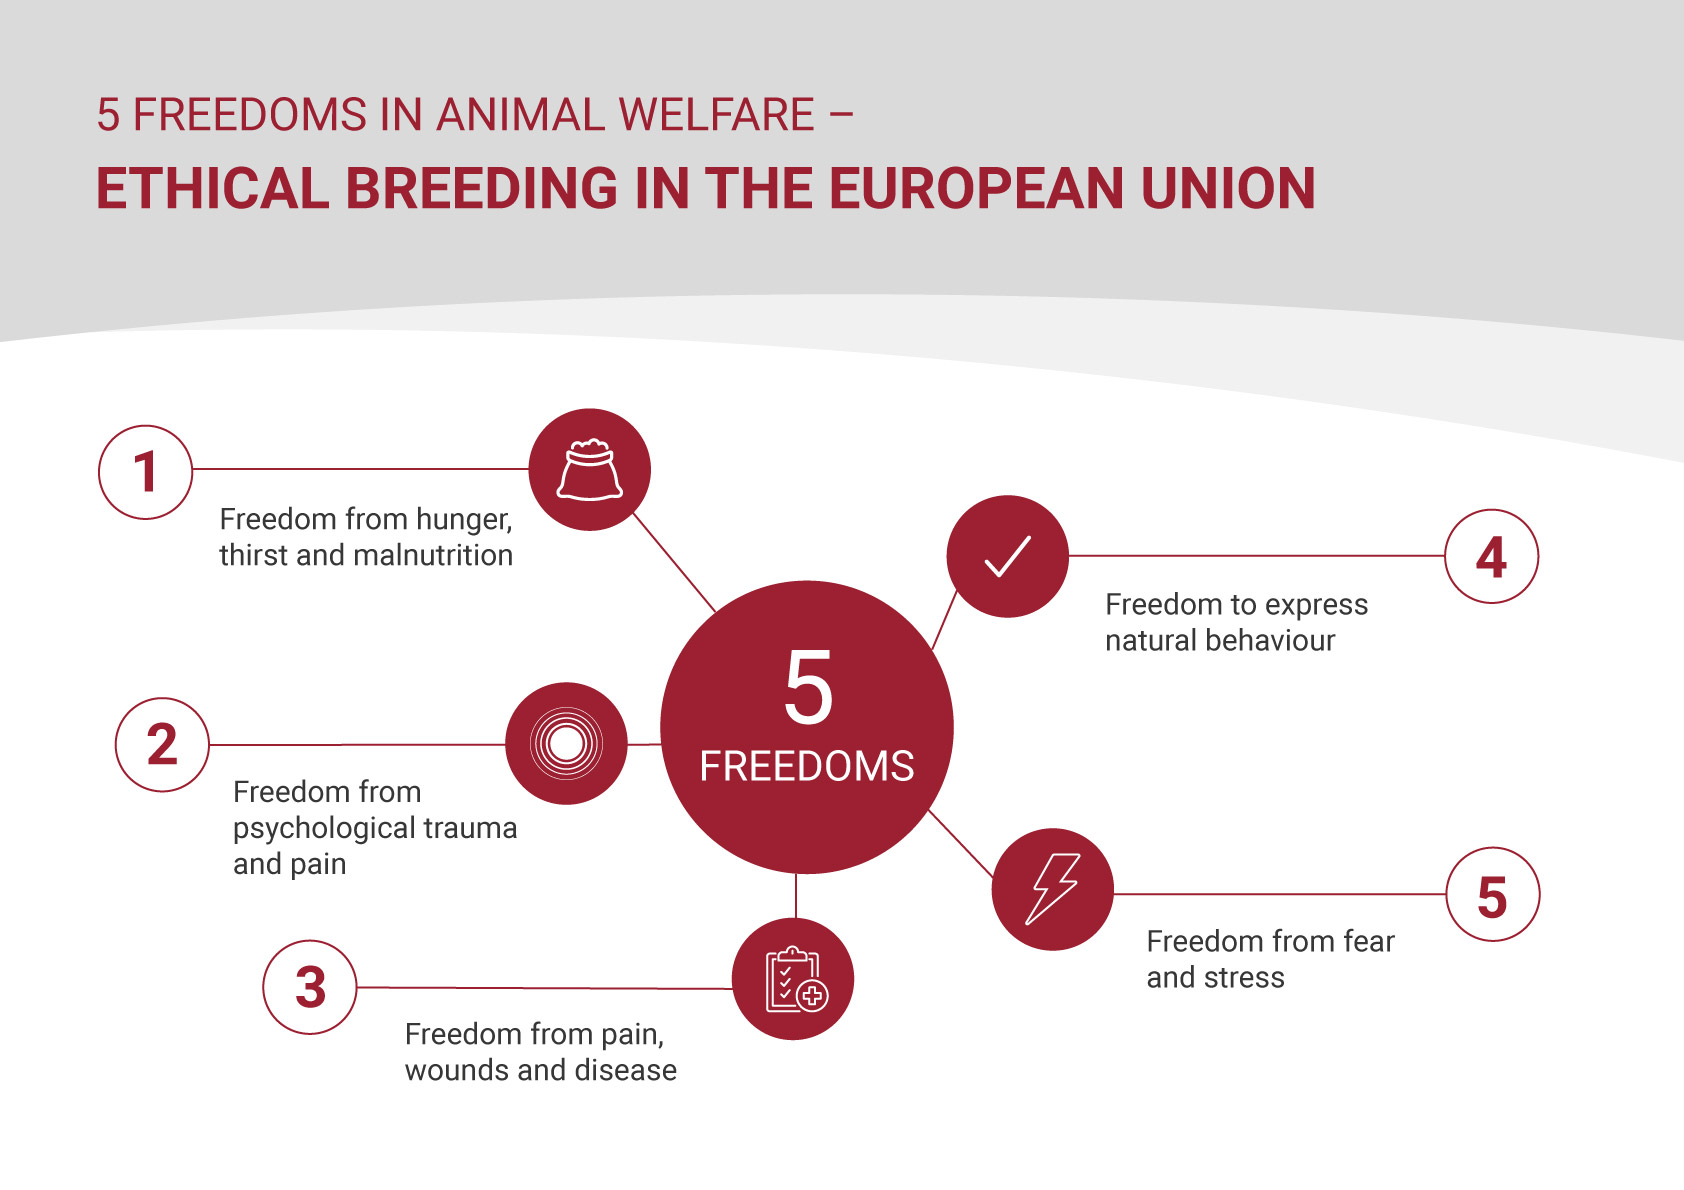 5 freedoms in animal welfare – ethical breeding in the European Union -  Meat from Europe